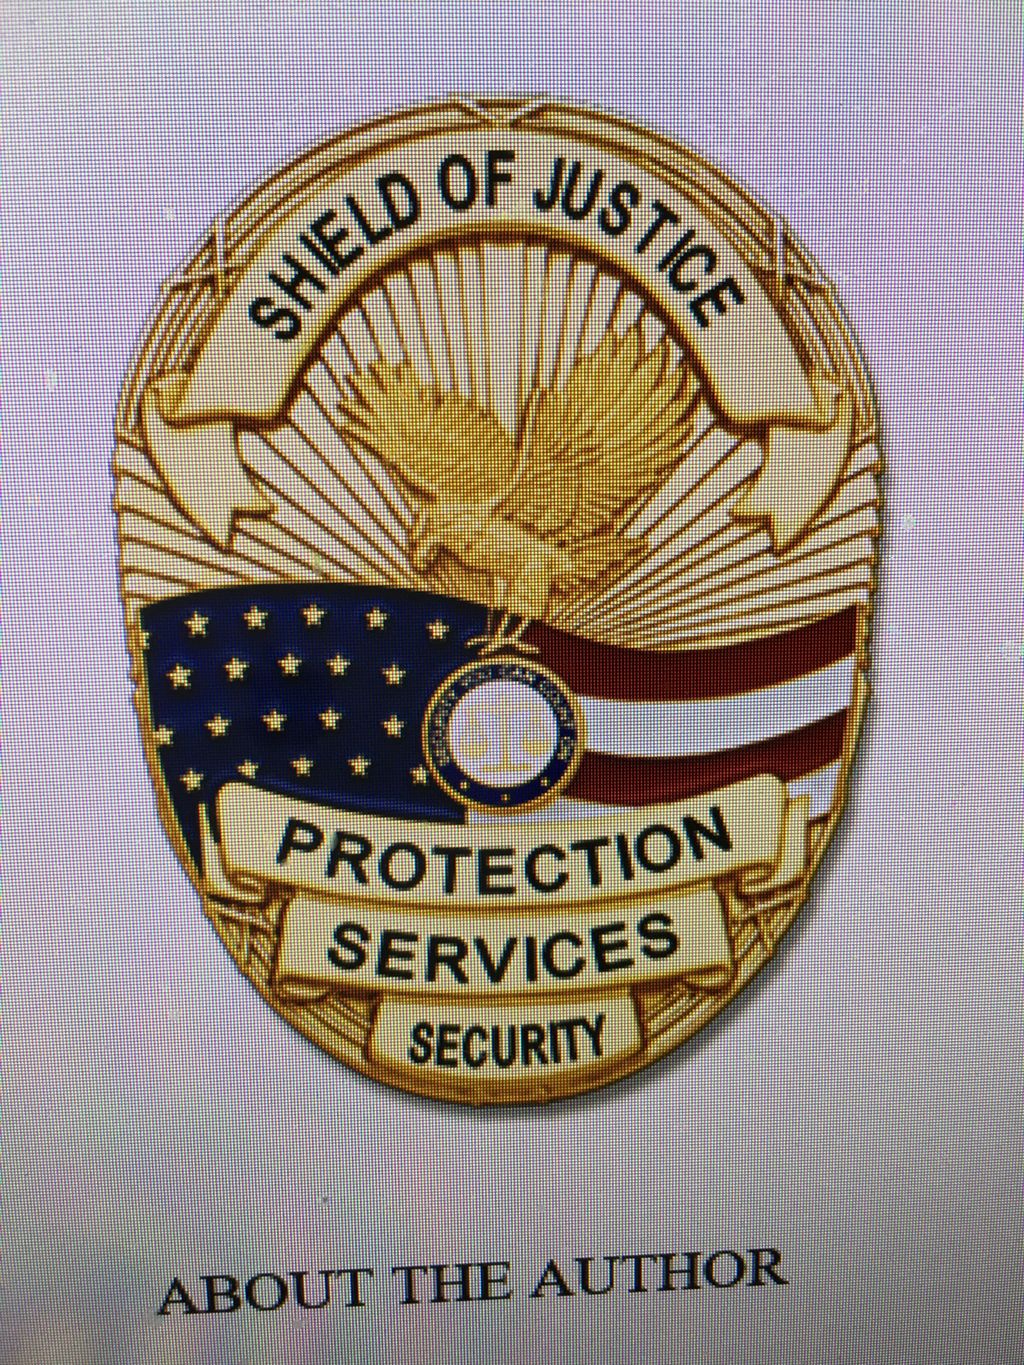 Shield of Justice Protection Services